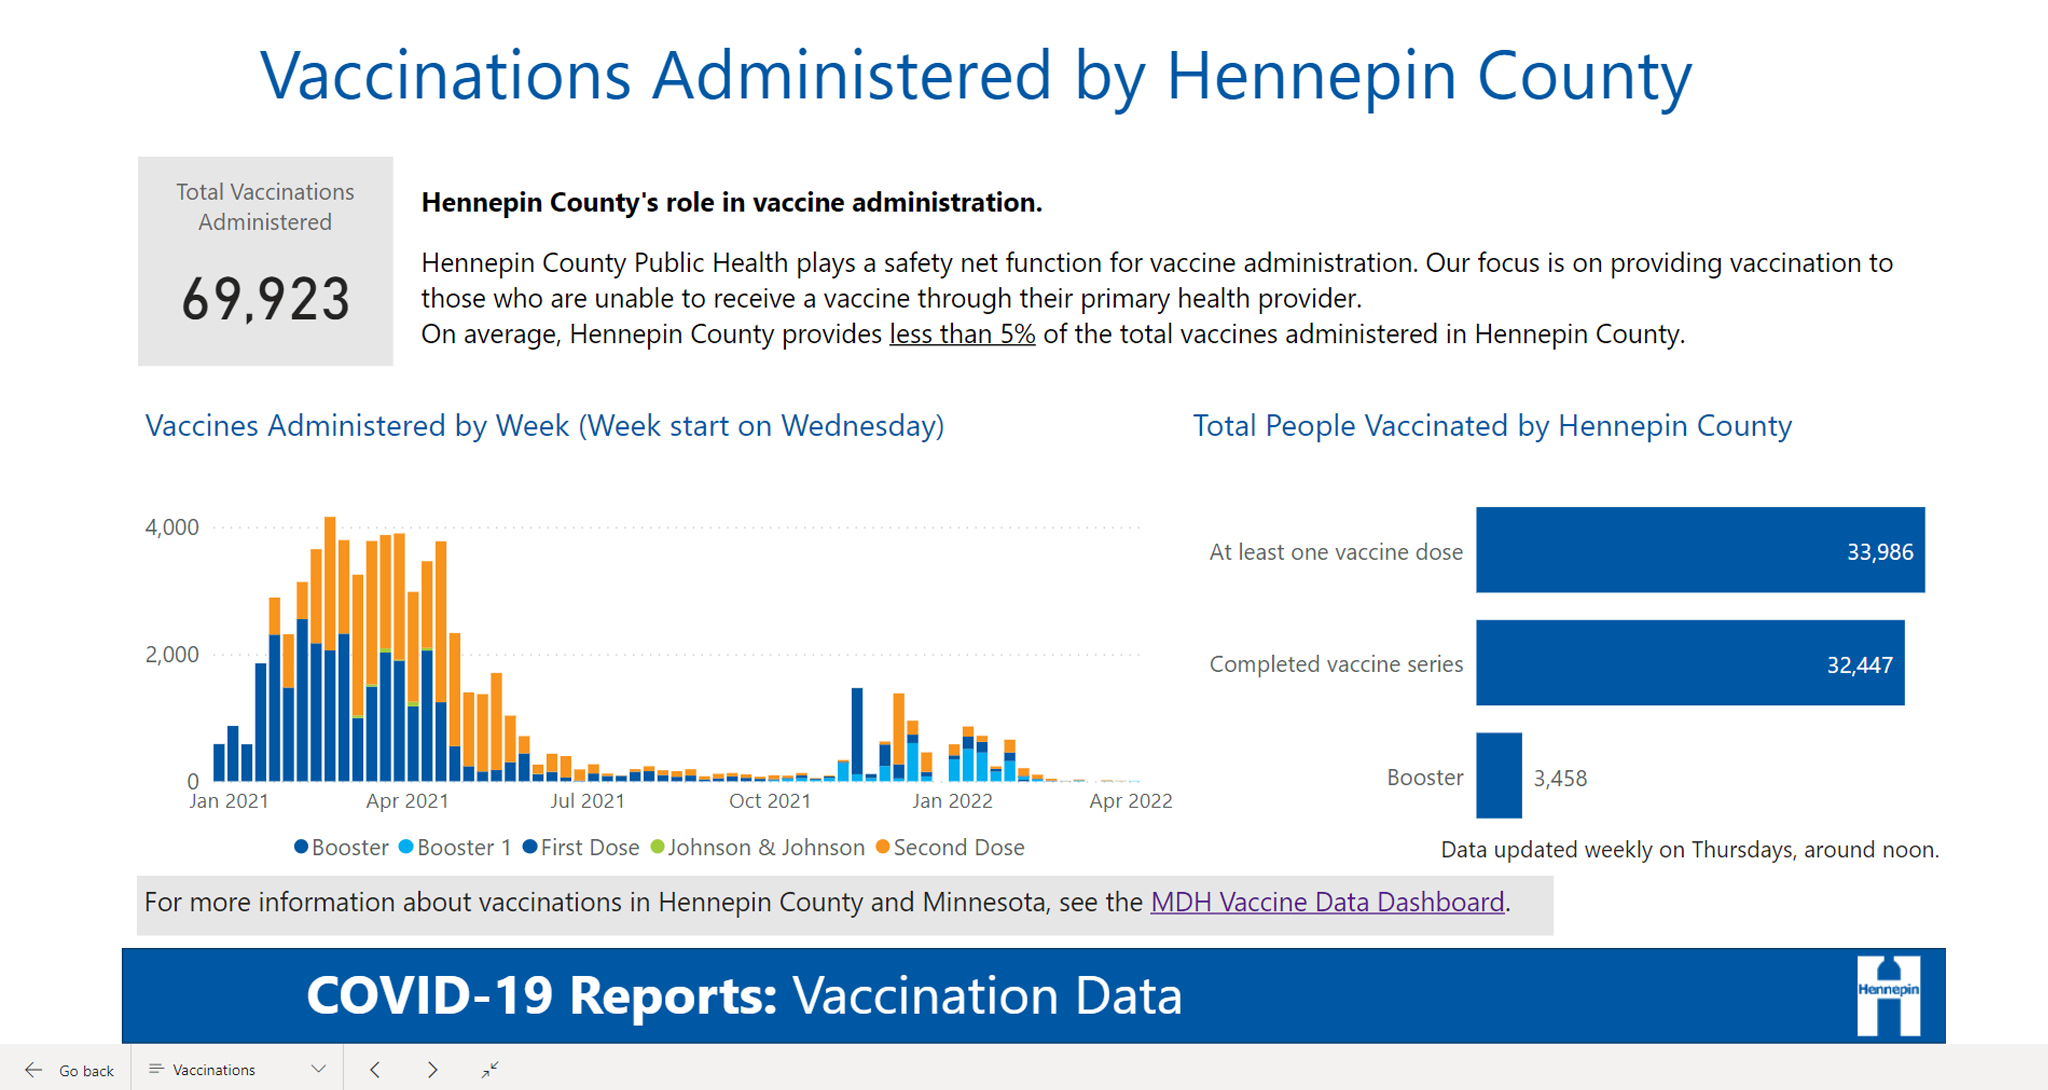 COVID vaccinations administered by Hennepin County